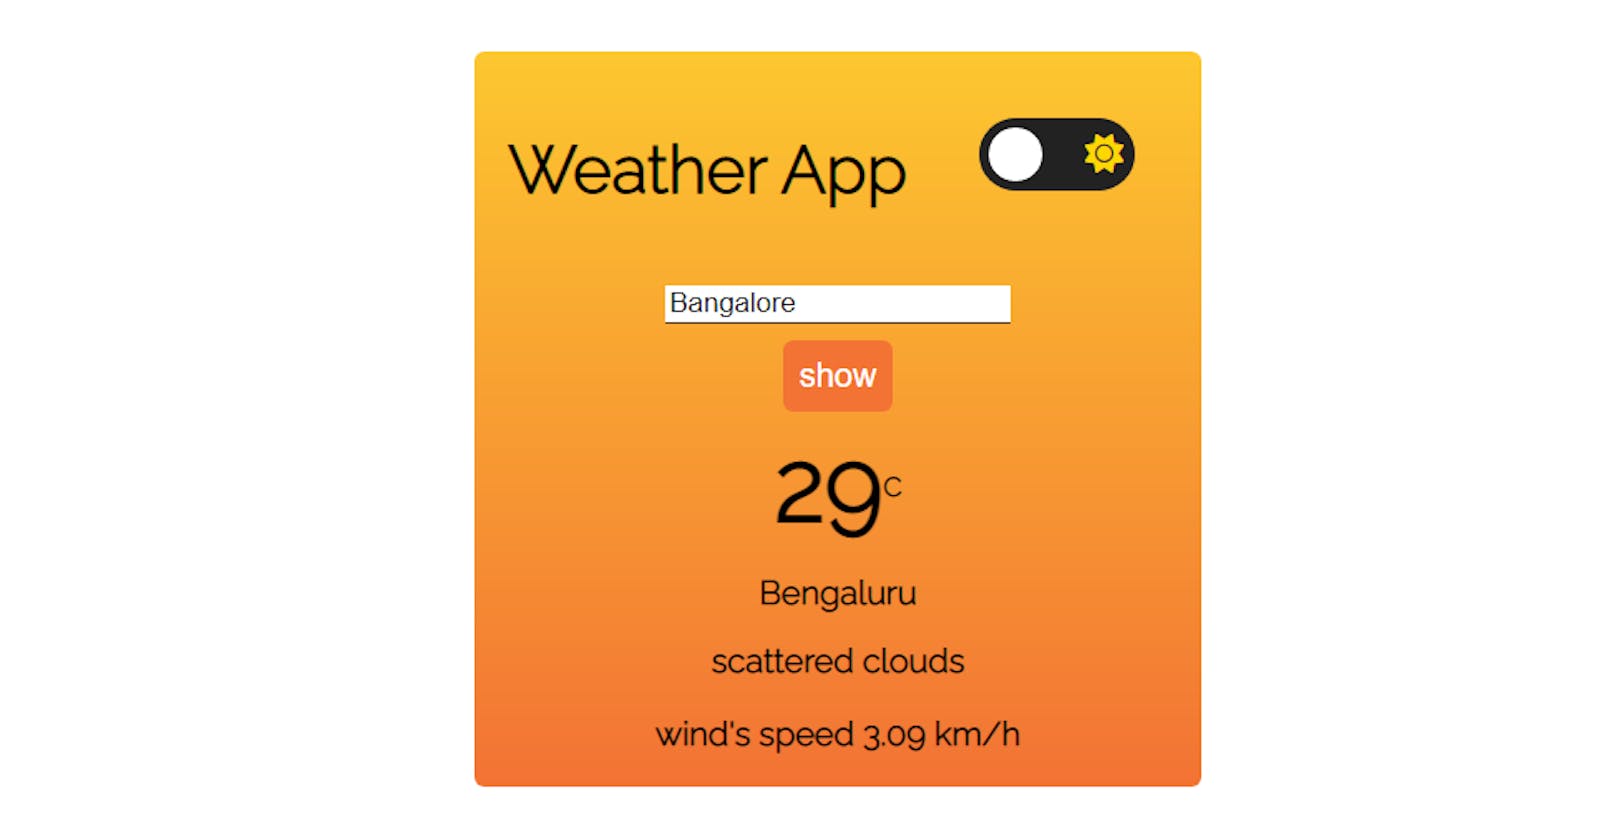 Let's code a weather app